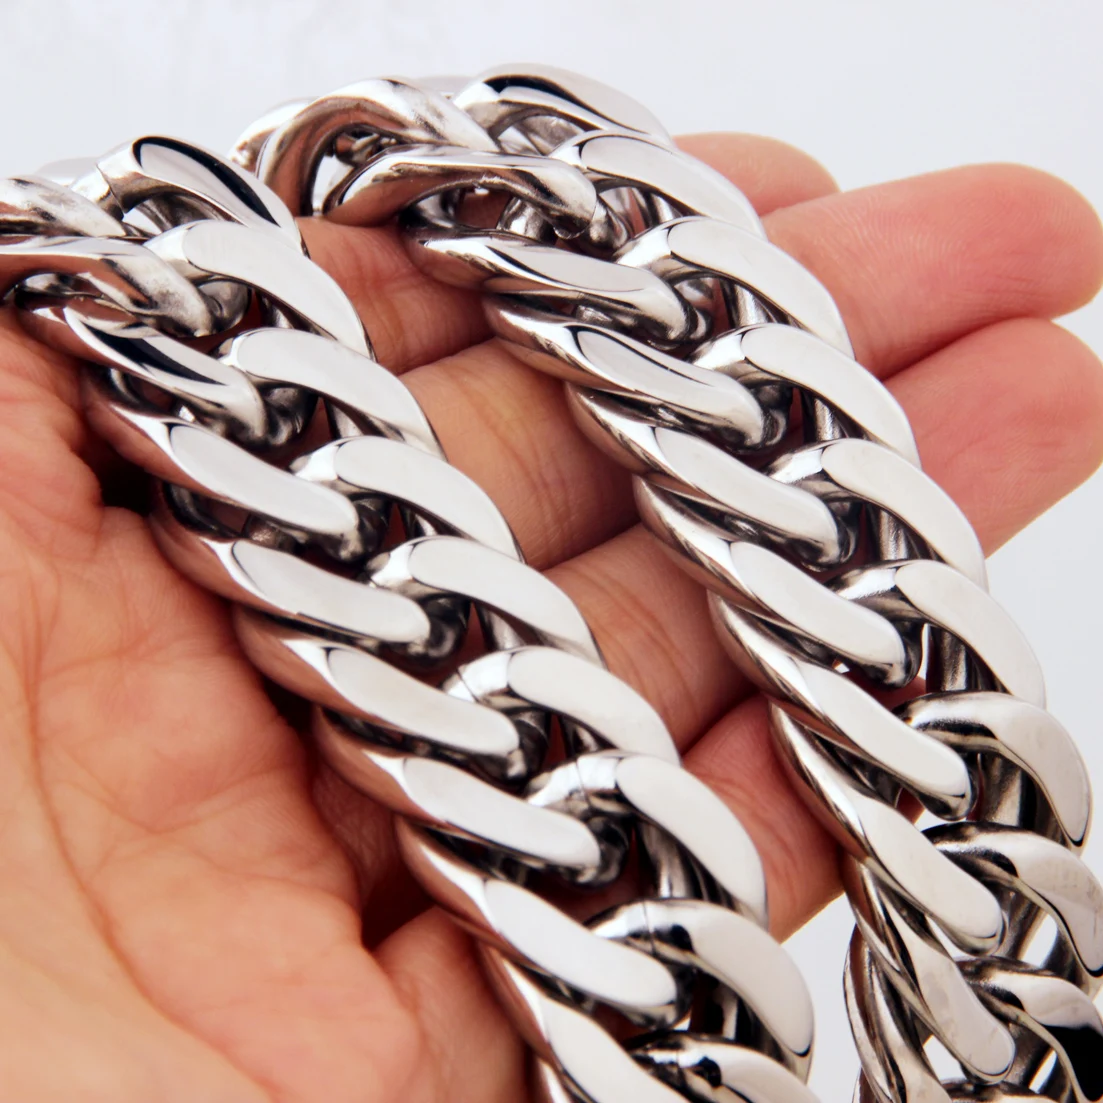 

Heavy Huge 18mm Polished Silver Color Cuban Curb Link Chain Stainless Steel Necklace/Bracelet Biker Mens Gift 7-40inch